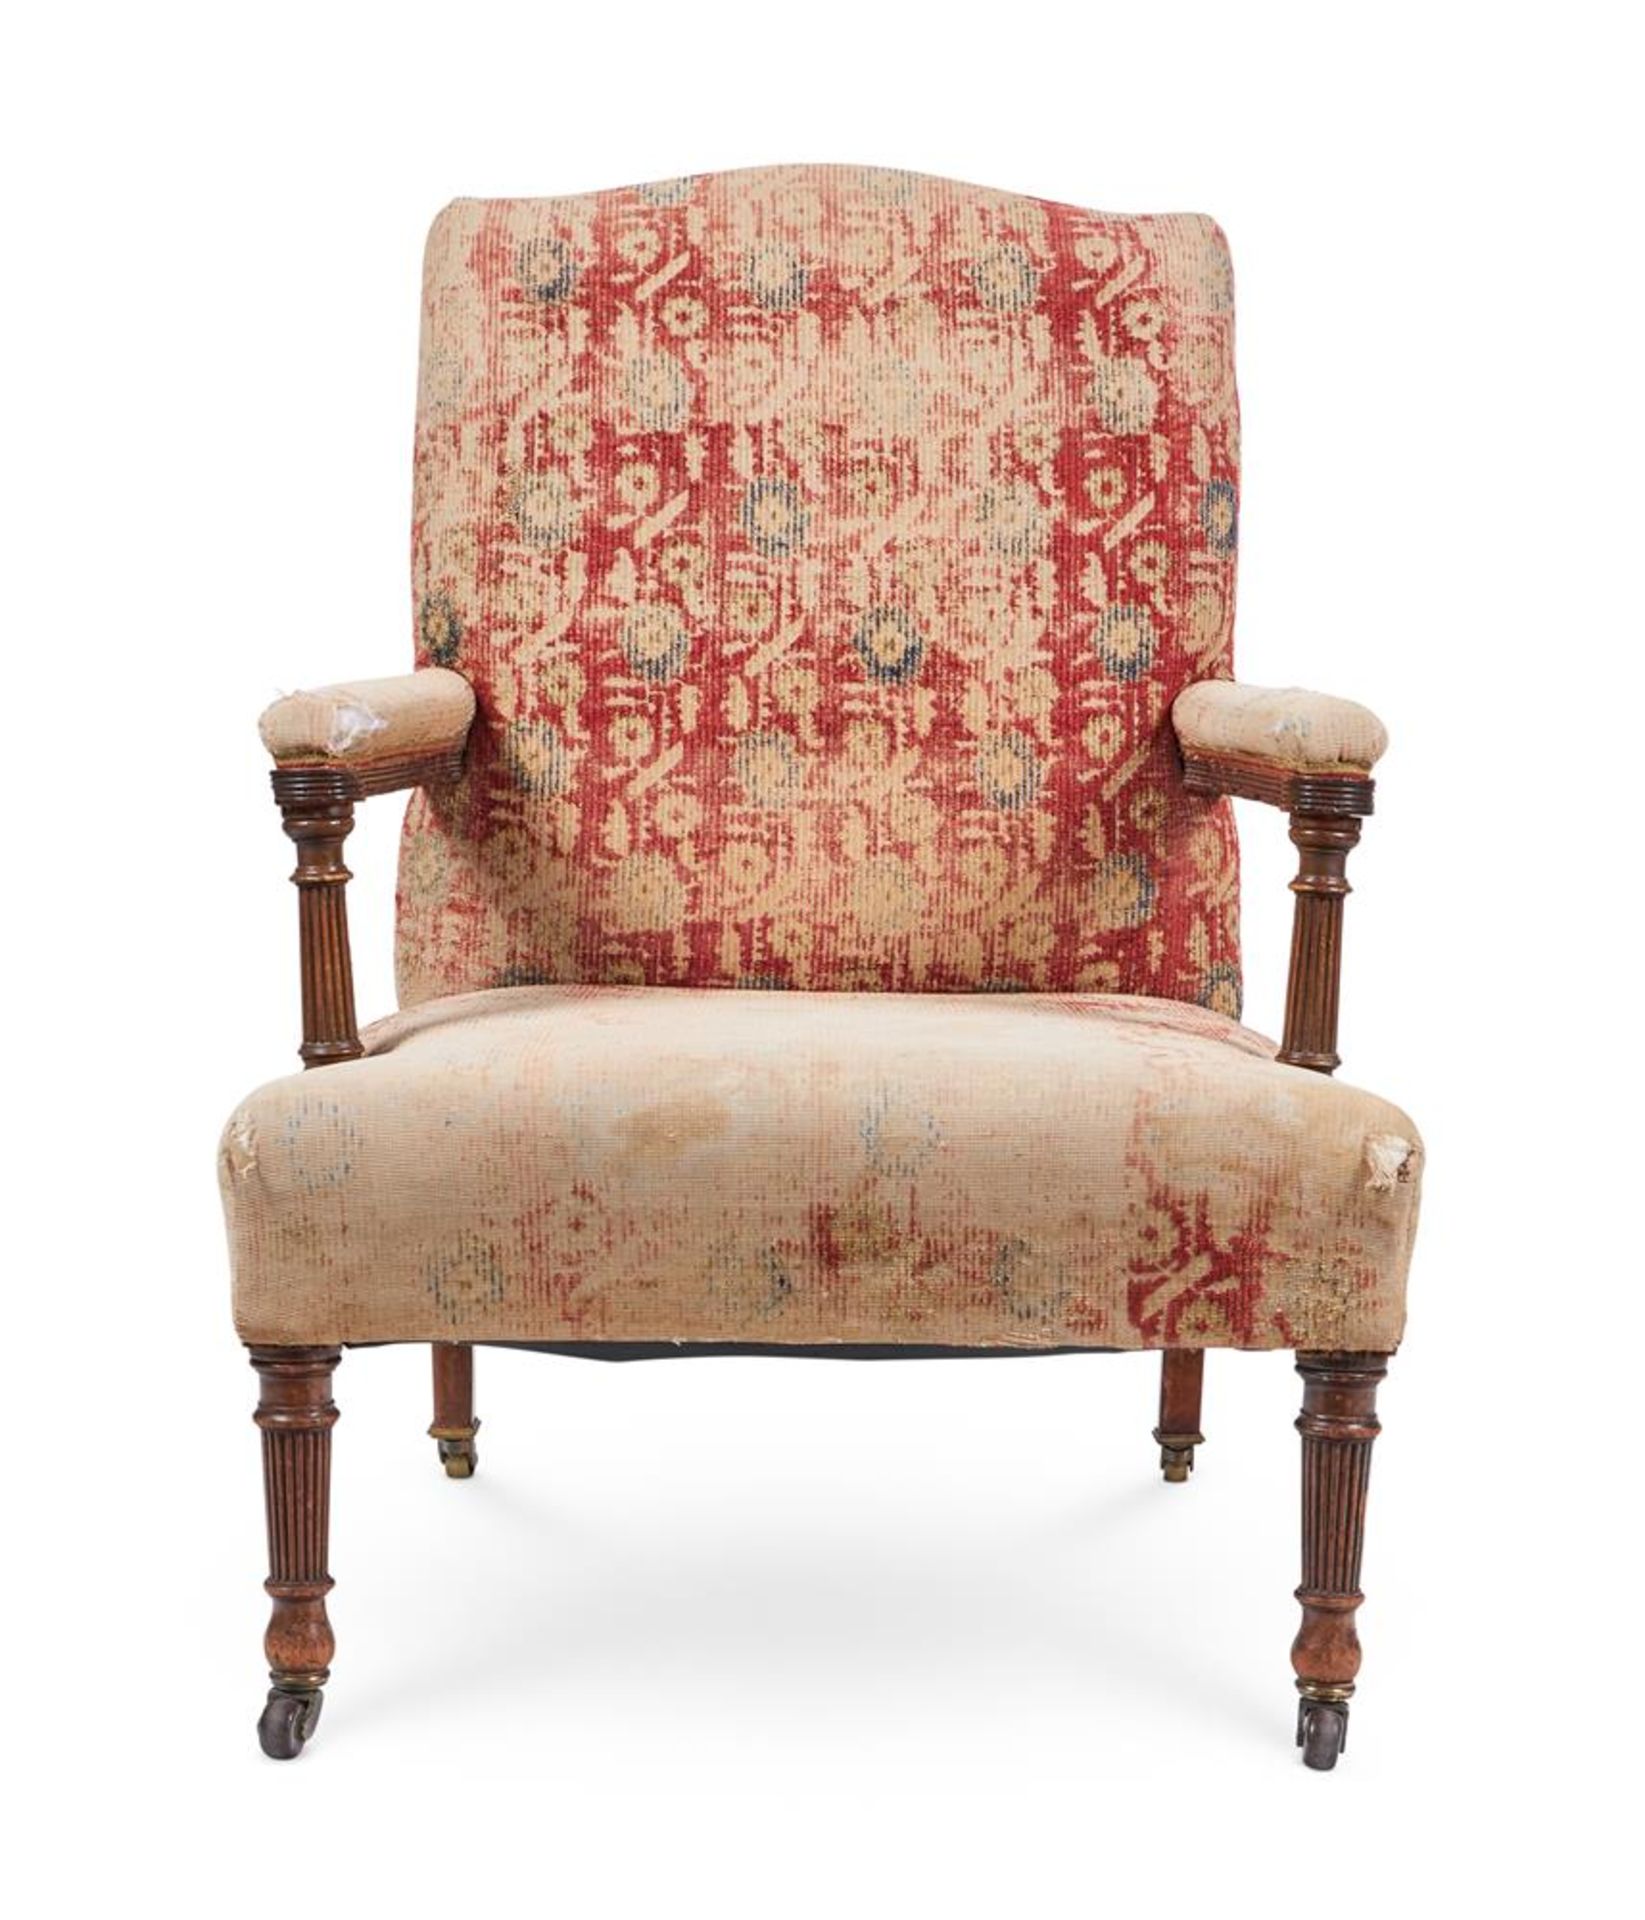 A VICTORIAN MAHOGANY OPEN ARMCHAIR, LATE 19TH CENTURY - Image 3 of 4